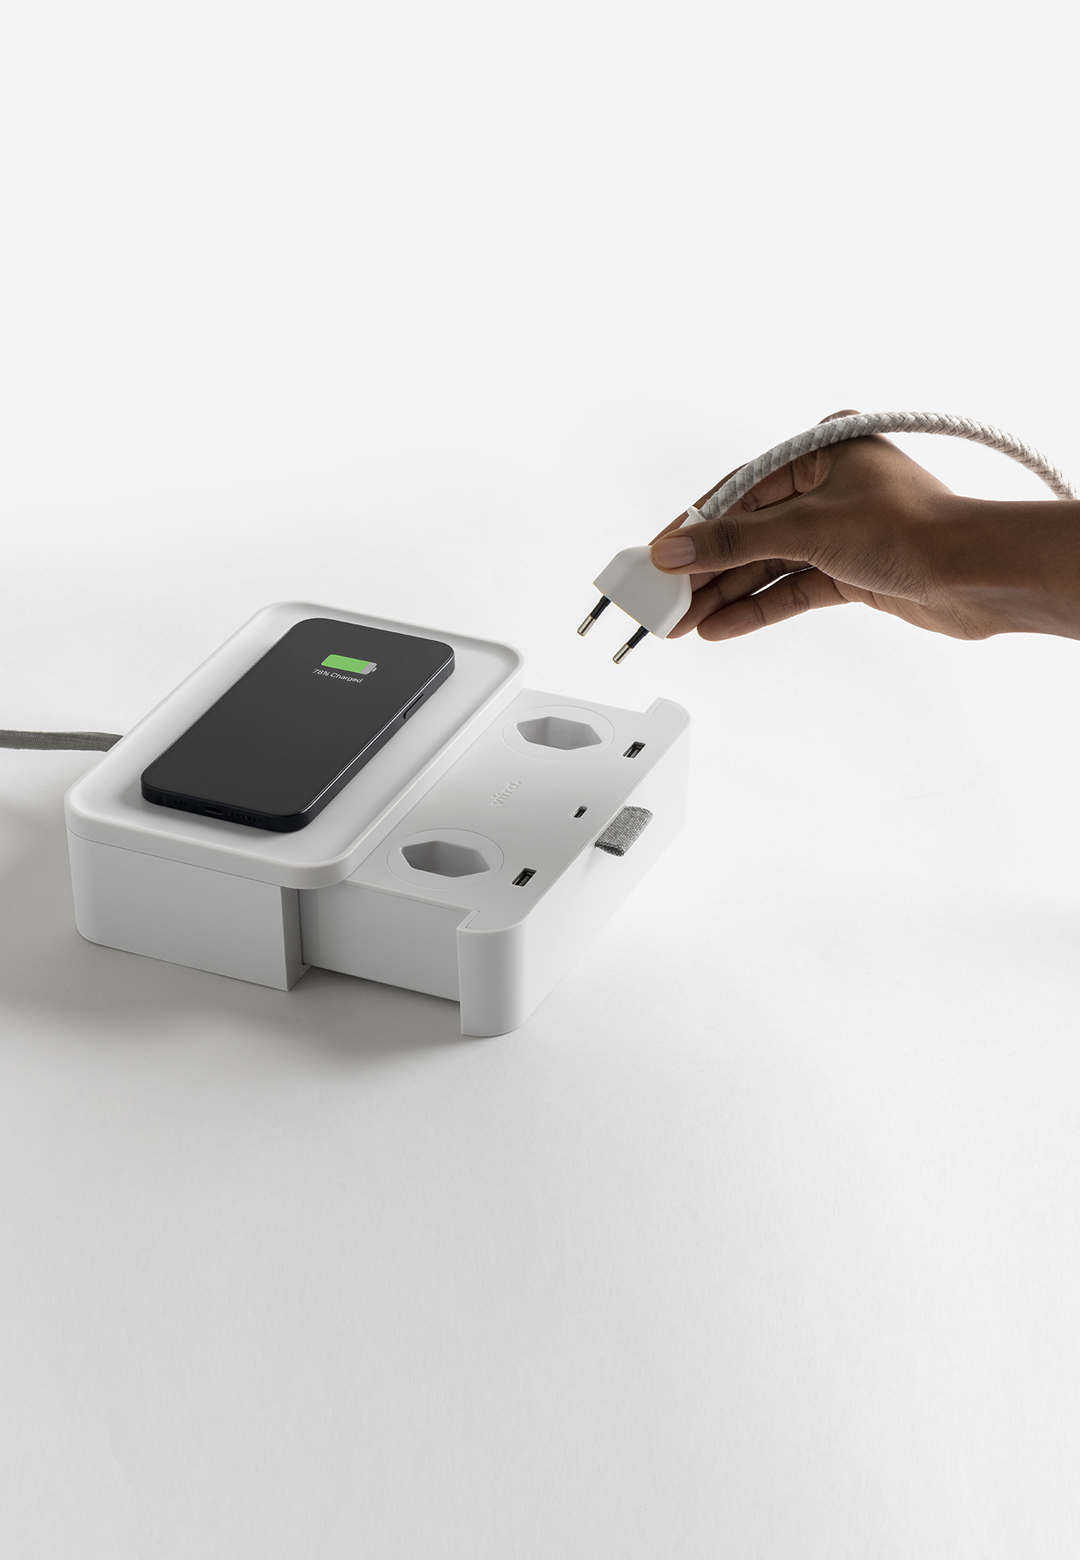 Vitra and LAYER team up to design ‘Ampi’, a sleek and convenient charging station